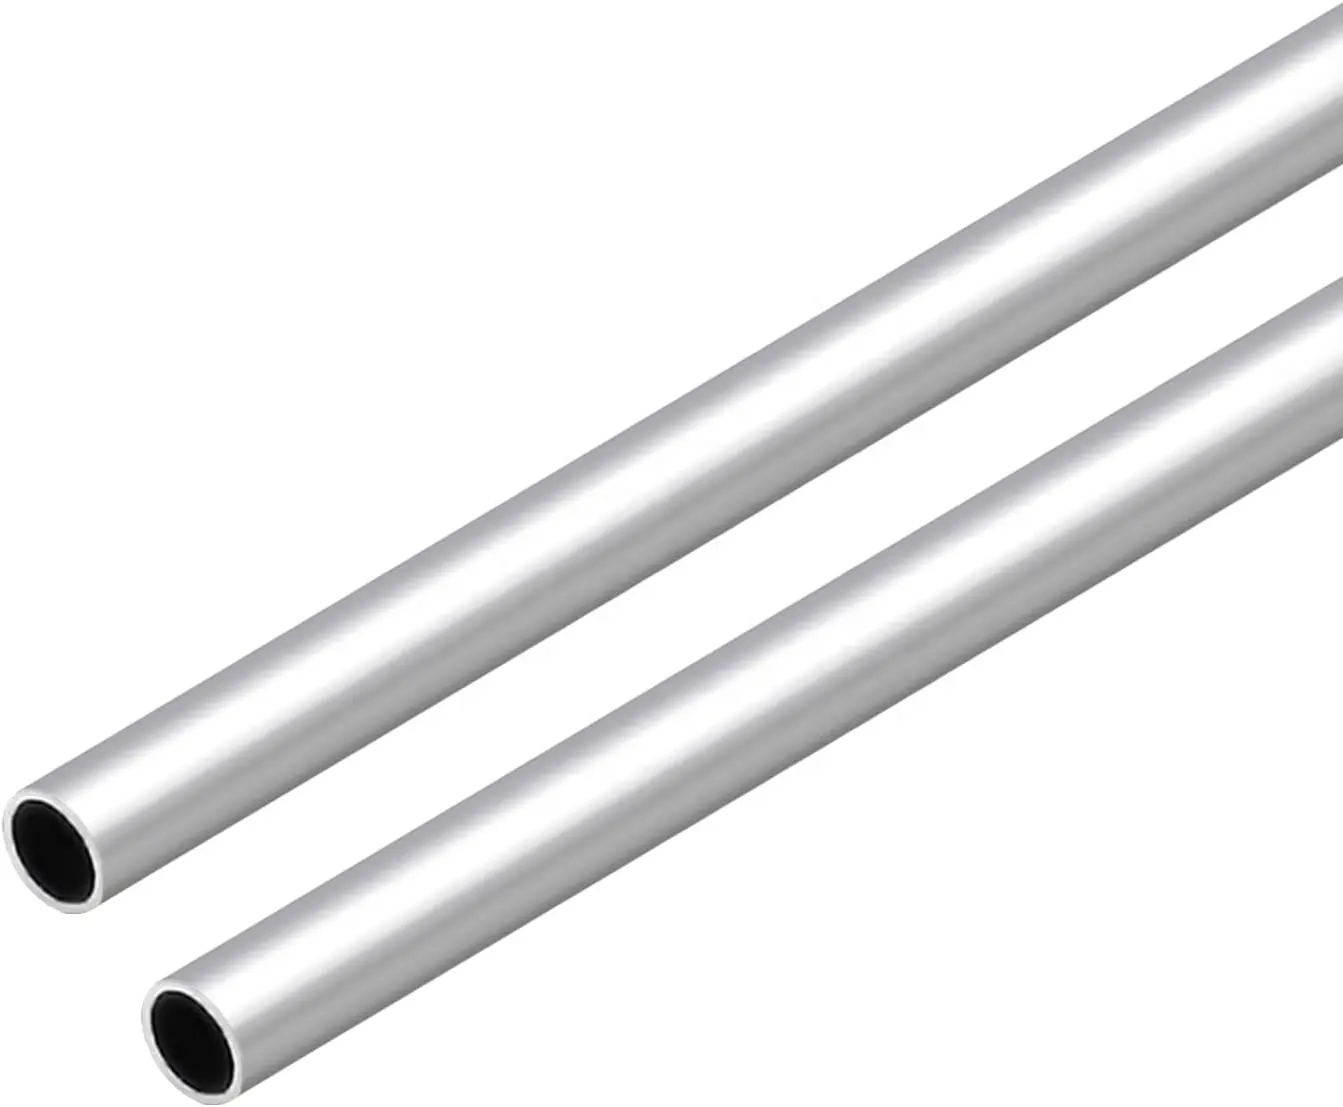 0.72--1.5Mm 0.5Mm-80Mm Aluminium Tubes For Electric Equipments Anodized 160-205 Rm/Mpa 6061 Aluminium Pipes Tubes